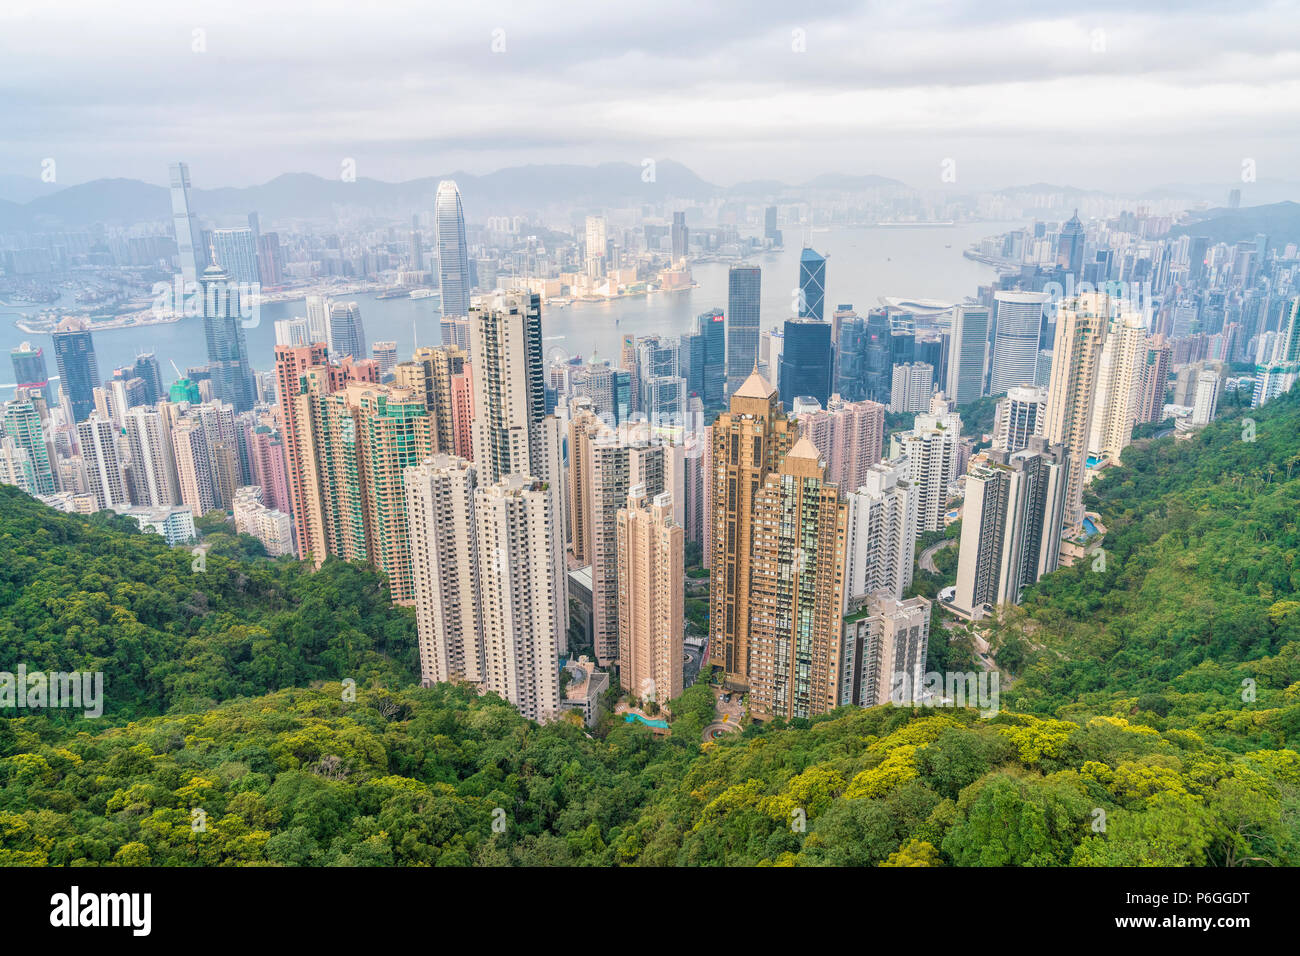 18 February 2018 - Hong Kong. Scenic city landscape panorama with many tall buildings. Picturesque view of Hong Kong skyline from Victoria Peak, famou Stock Photo